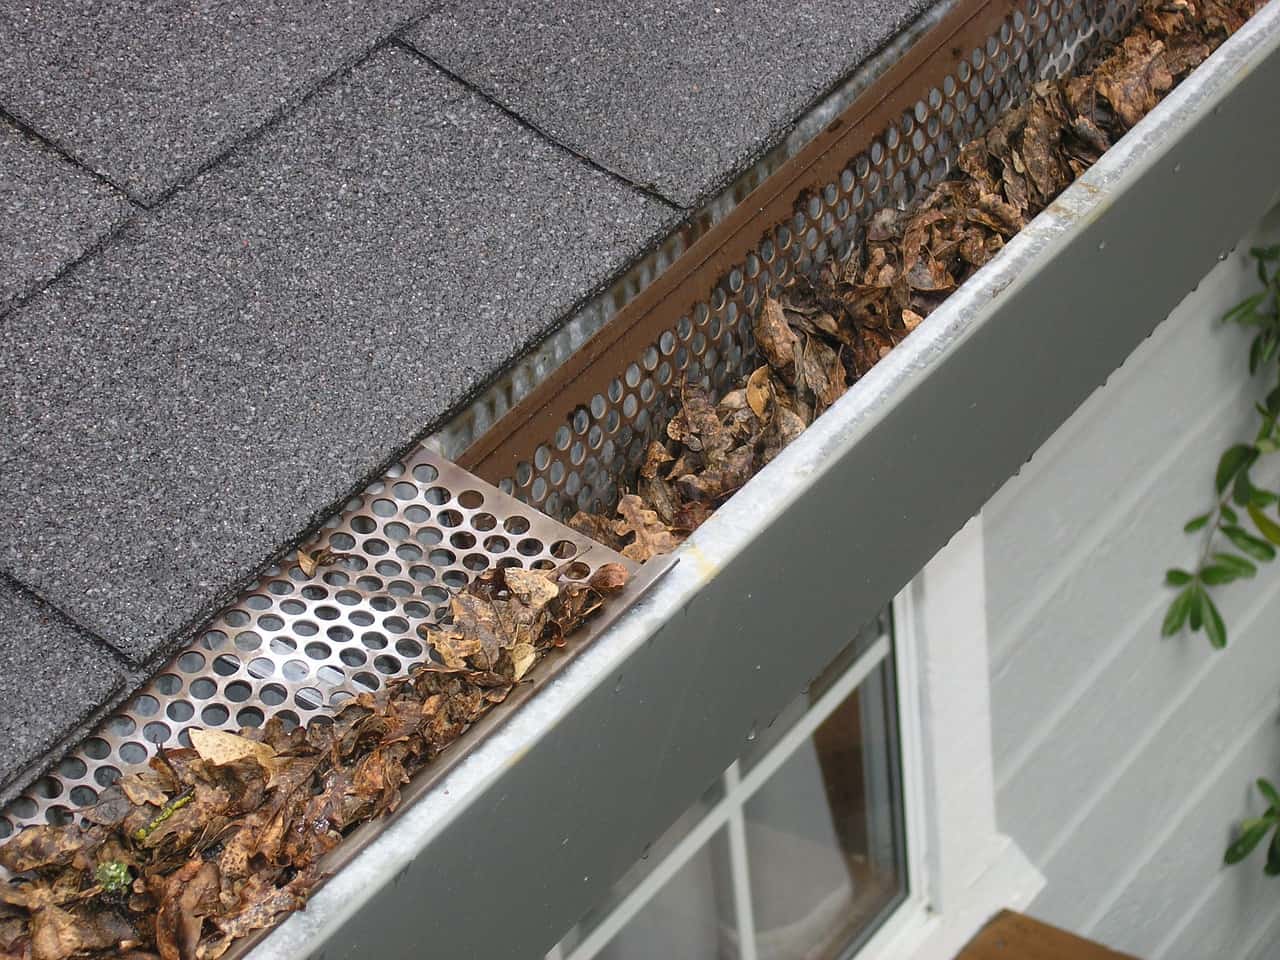 Pest prevention tips includes checking and clearing gutters on your home.